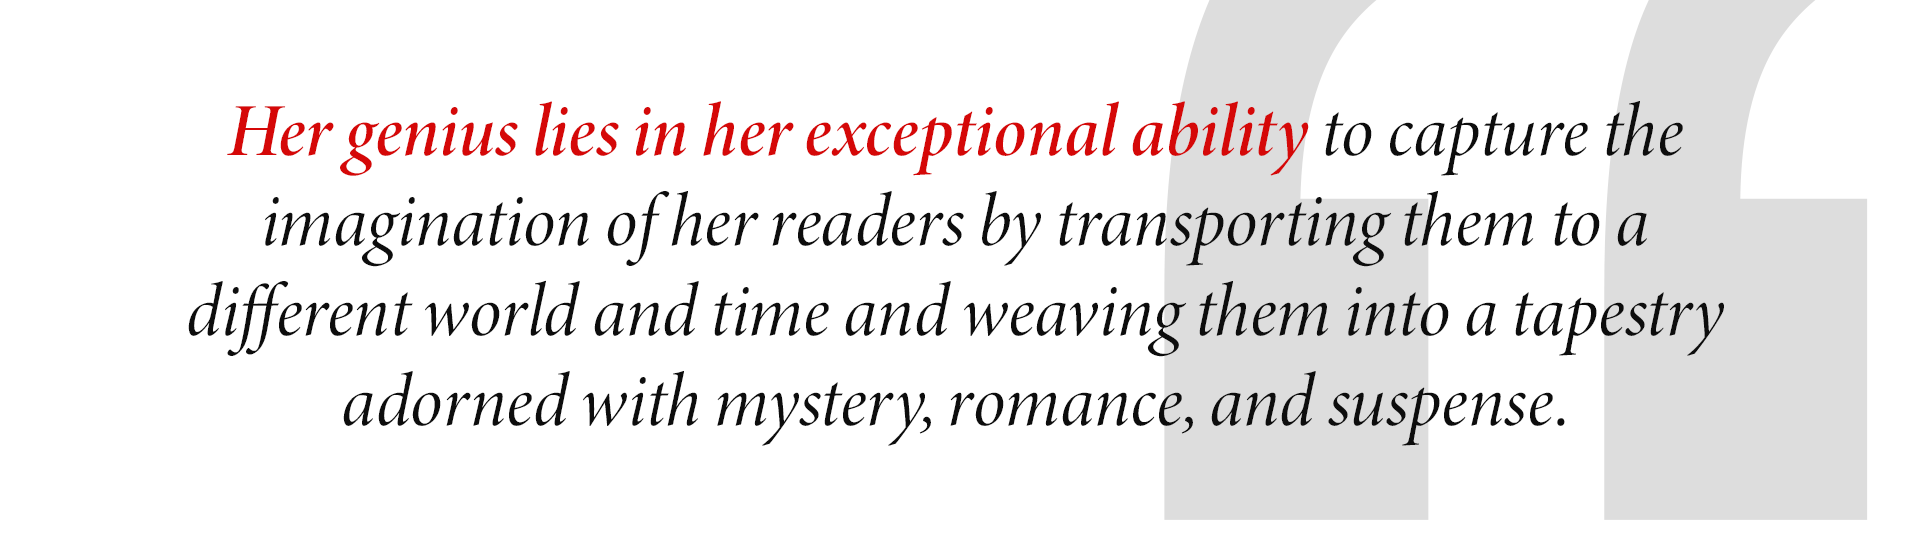 Her genius lies in her exceptional ability to capture the
imagination of her readers by transporting them to a
different world and time and weaving them into a tapestry adorned with mystery, romance, and suspense.